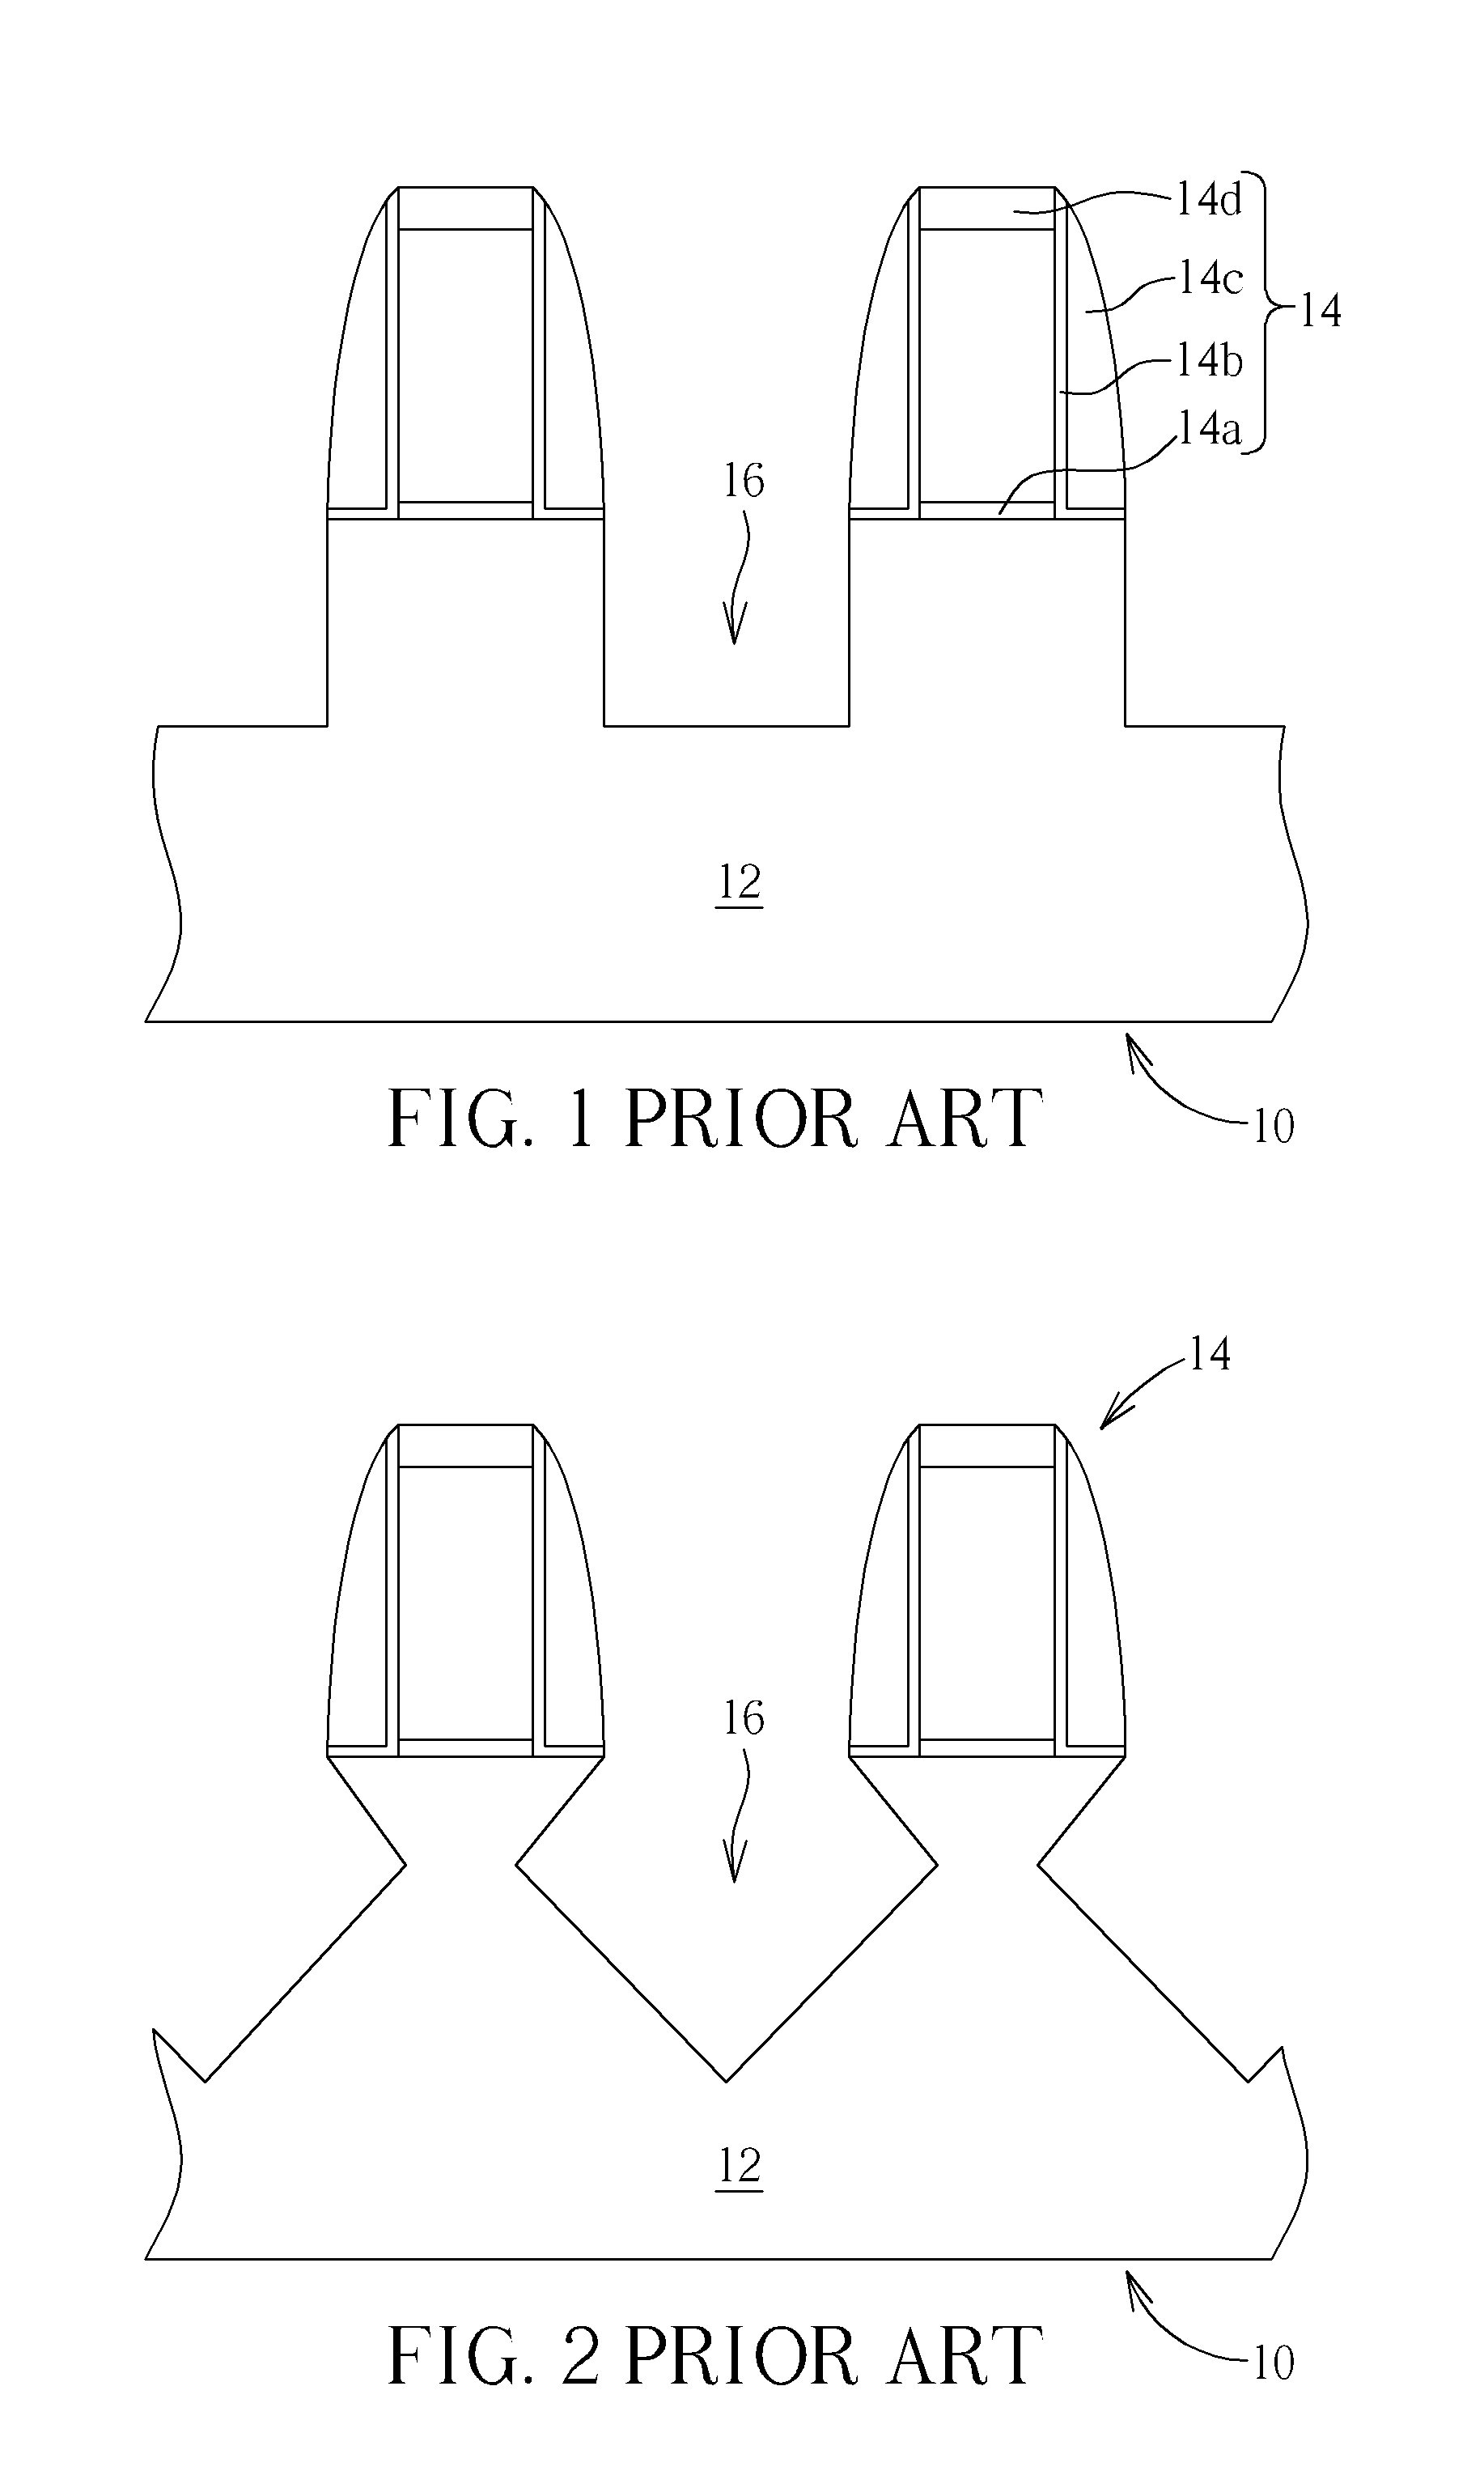 Semiconductor process for etching a recess into a substrate by using an etchant that contains hydrogen peroxide